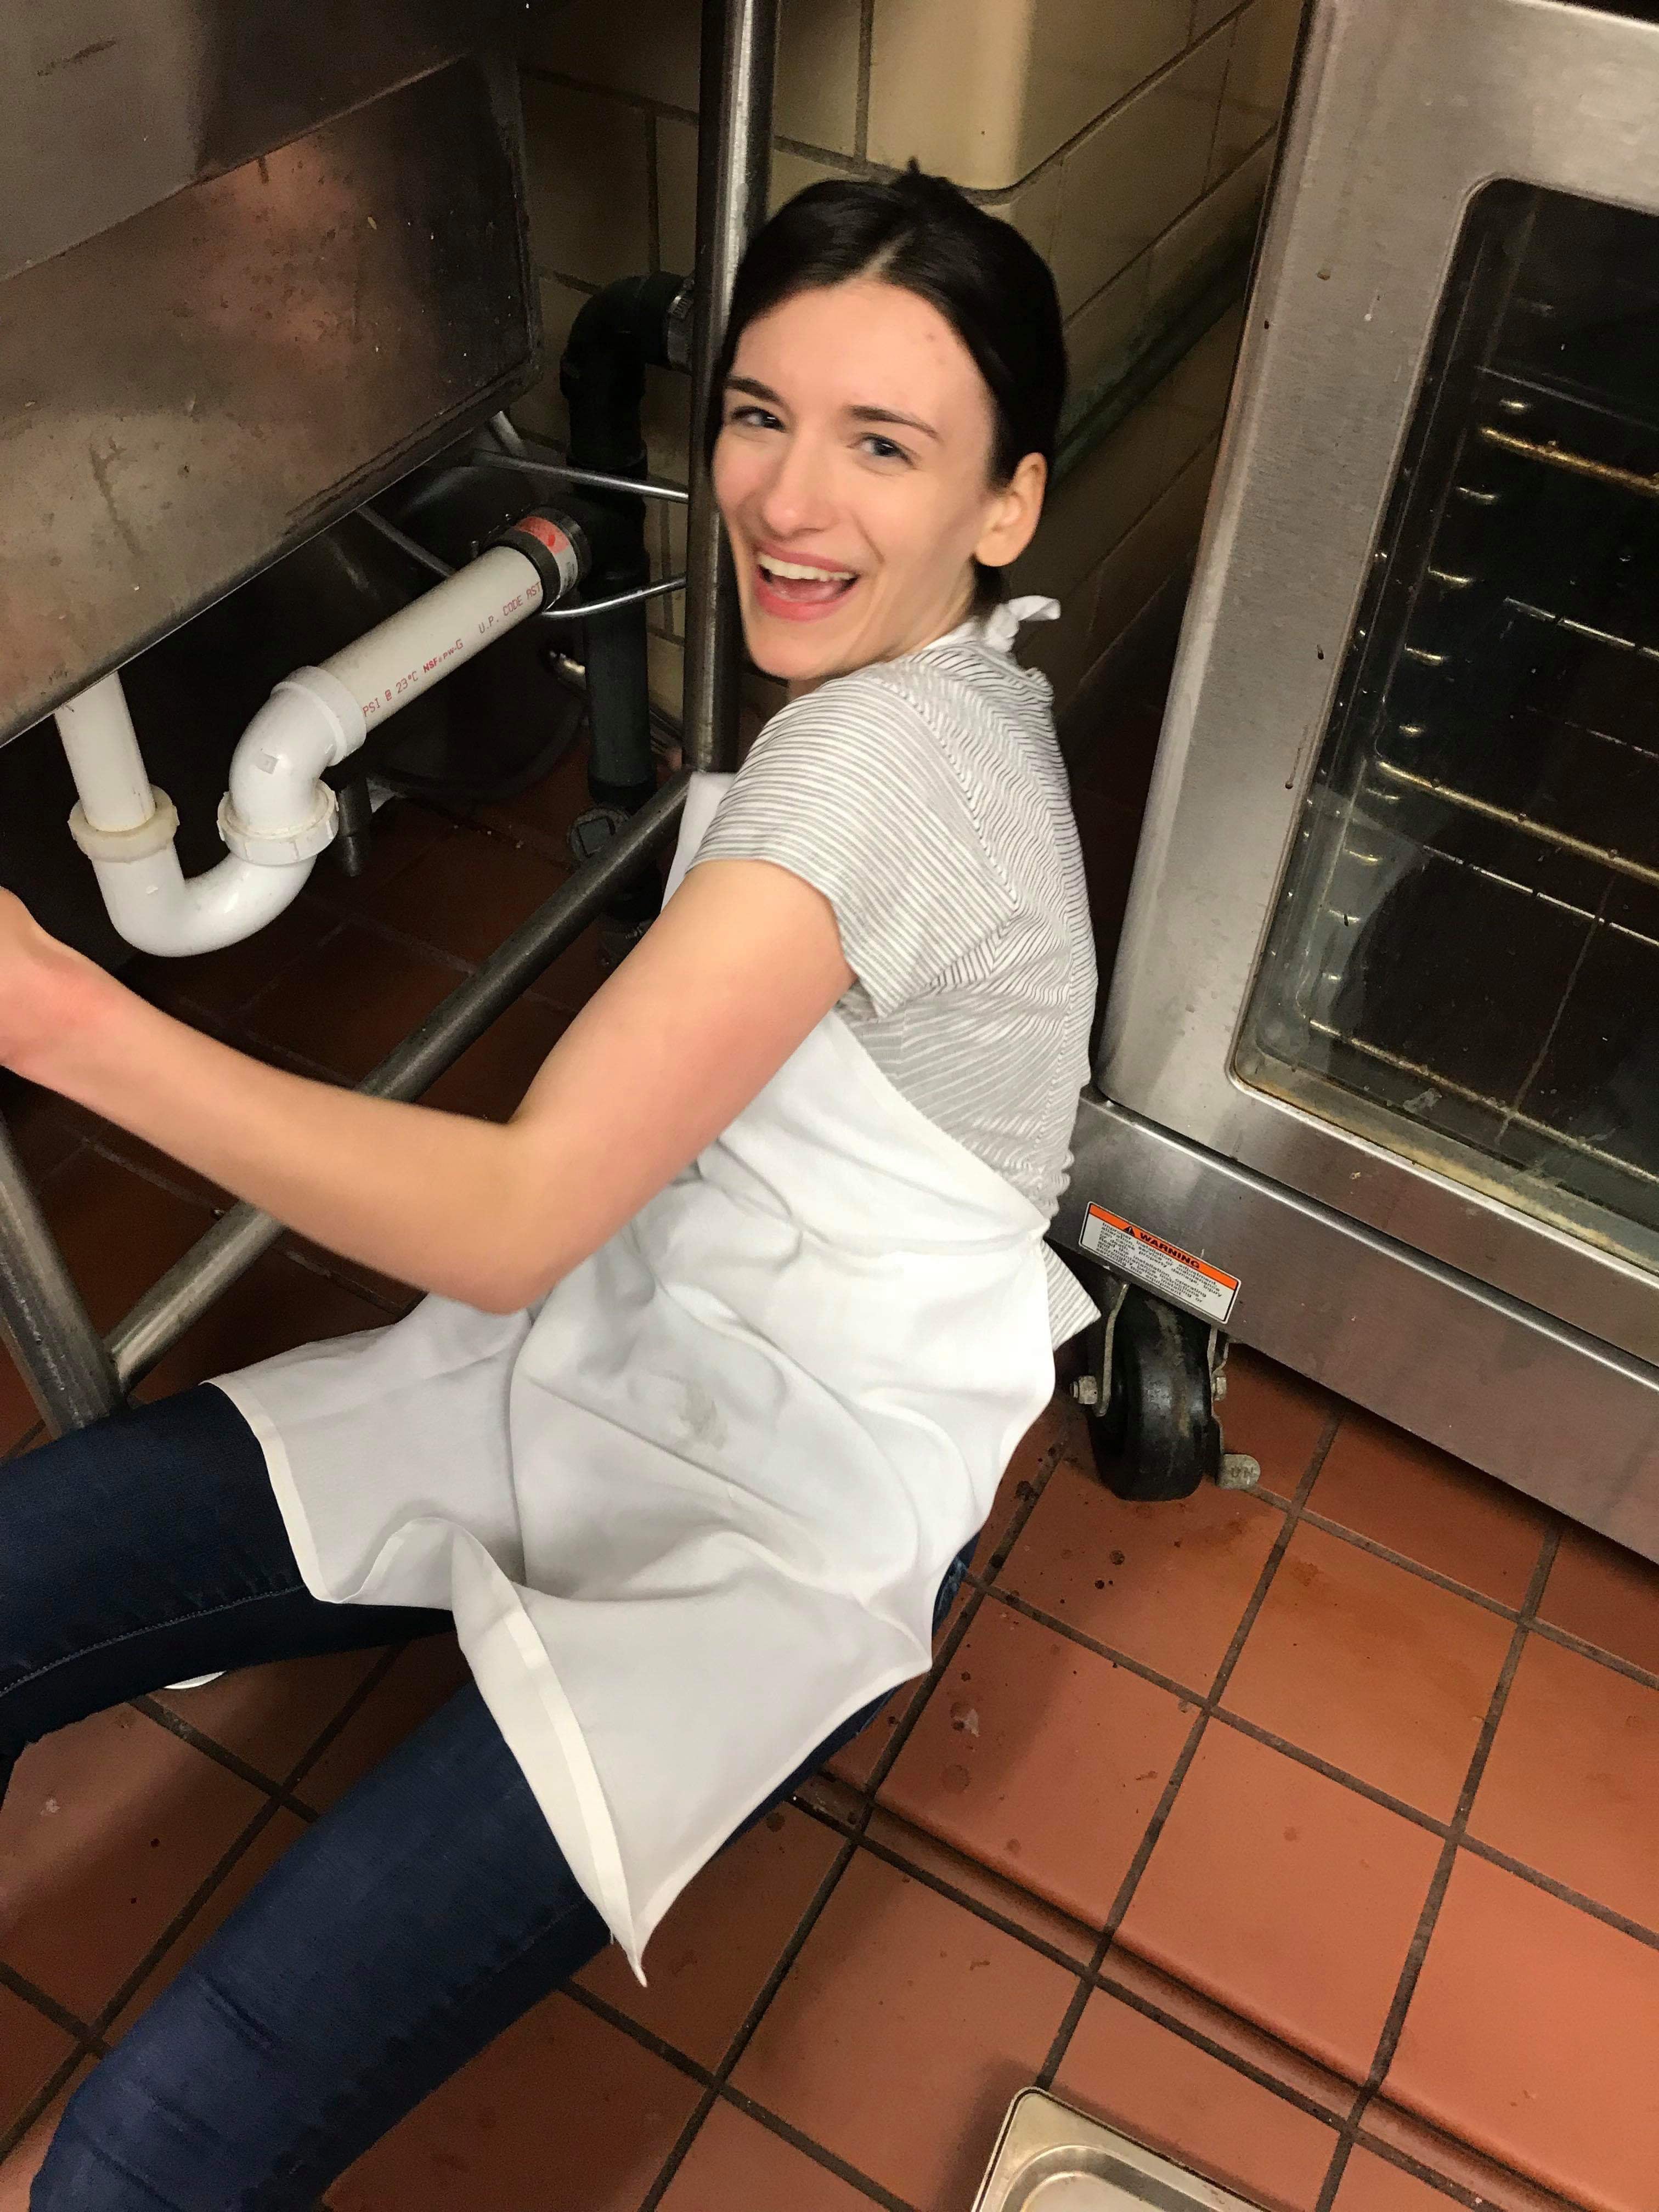 Megan sits on the red tiled floor of Fairchild Co-op's kitchen, wearing an apron and her hair in a ponytail. She is between an oven and a sink; her body is oriented toward the sink, a pair of tongs barely visible in her right hand, but she turns back to look at the camera. This is the happiest she has ever looked.